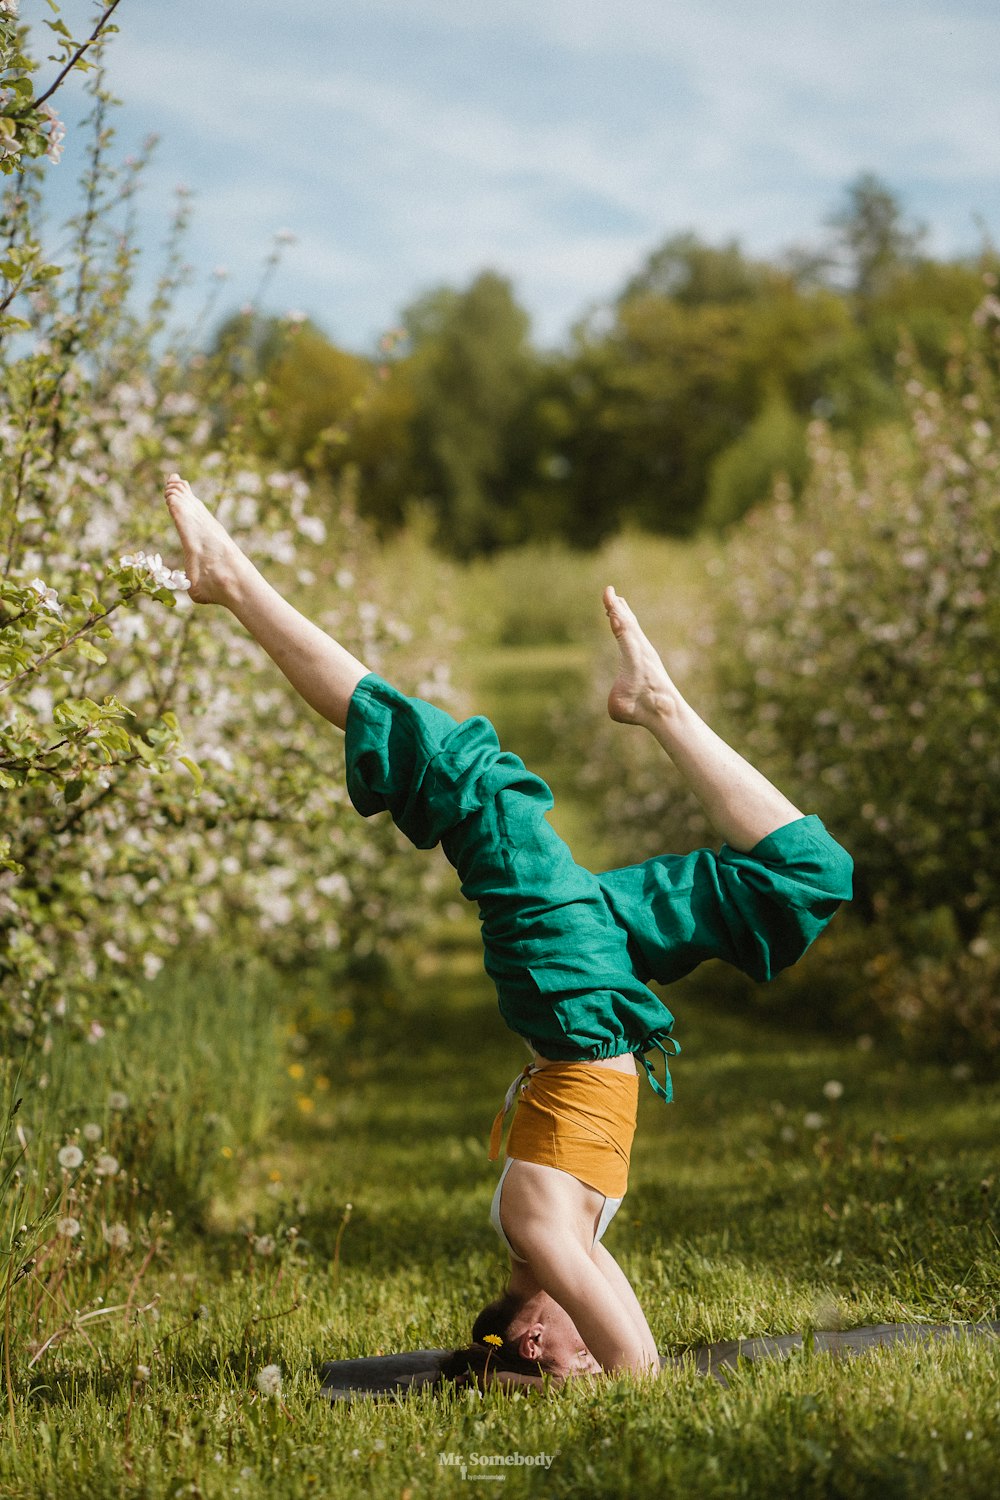 a person doing a handstand in a grassy field